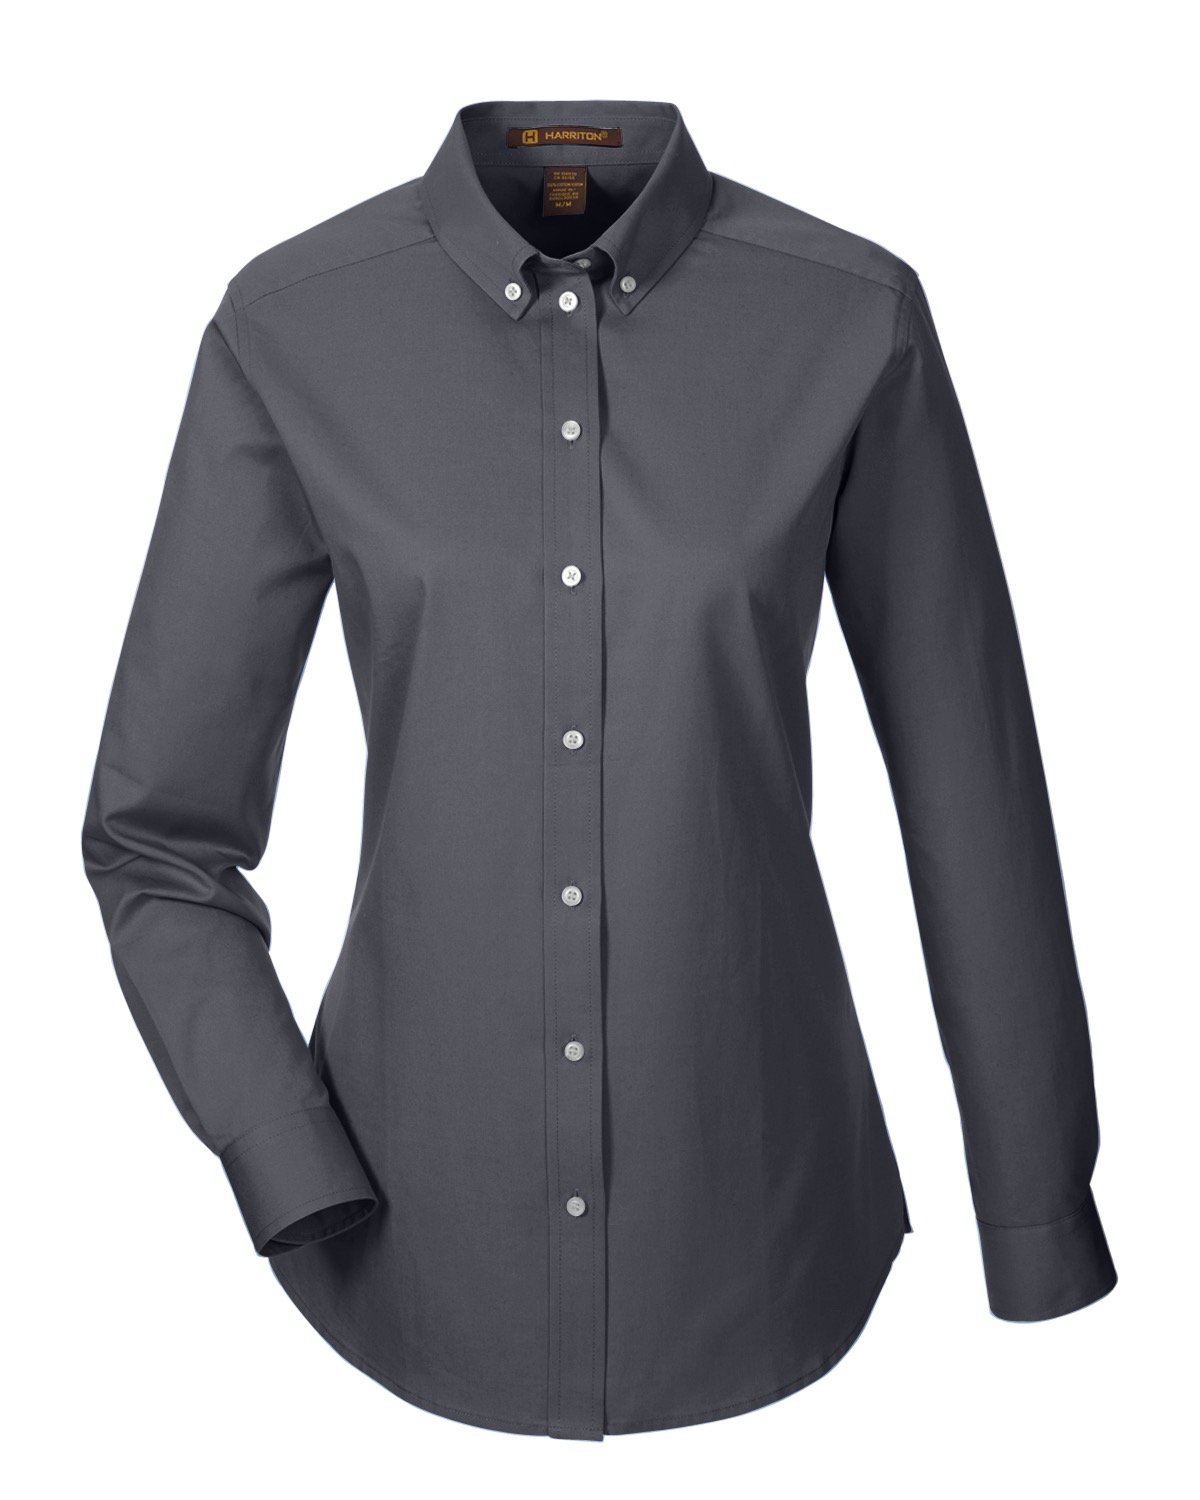 Picture of Harriton Ladies' Foundation 100% Cotton Long-Sleeve Twill Shirt with Teflon